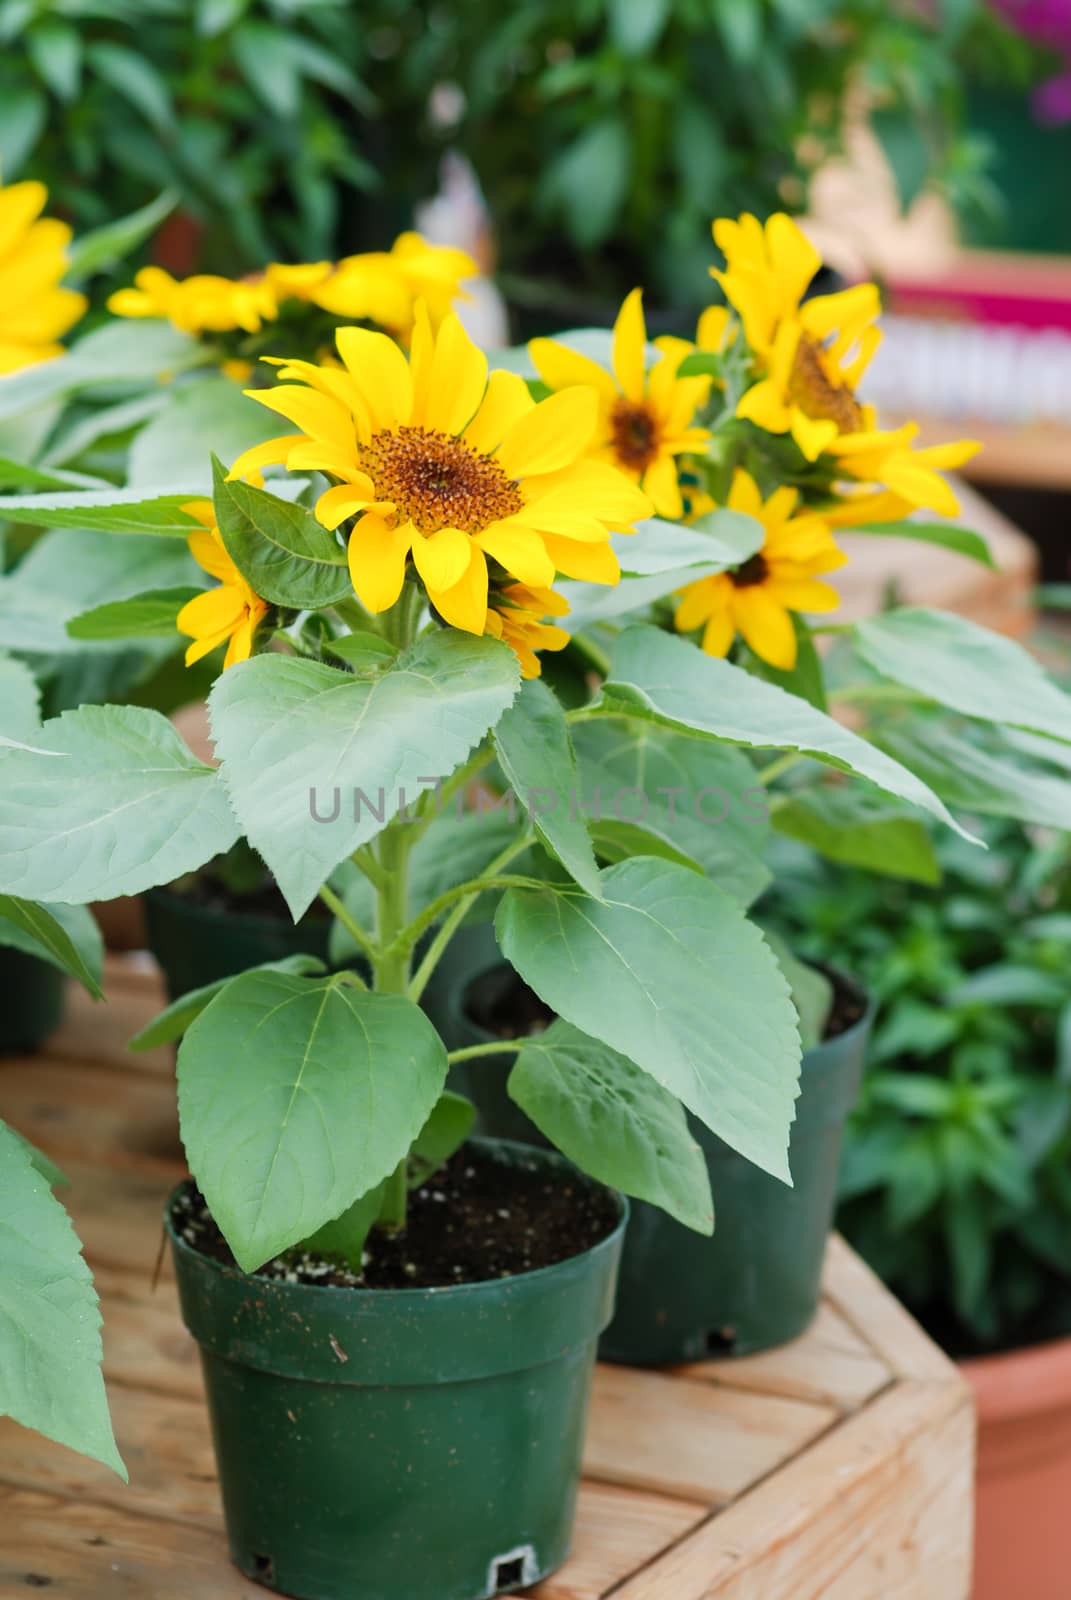 Helianthus annuus, small and potted sunflowers. dwarf helianthus by yuiyuize